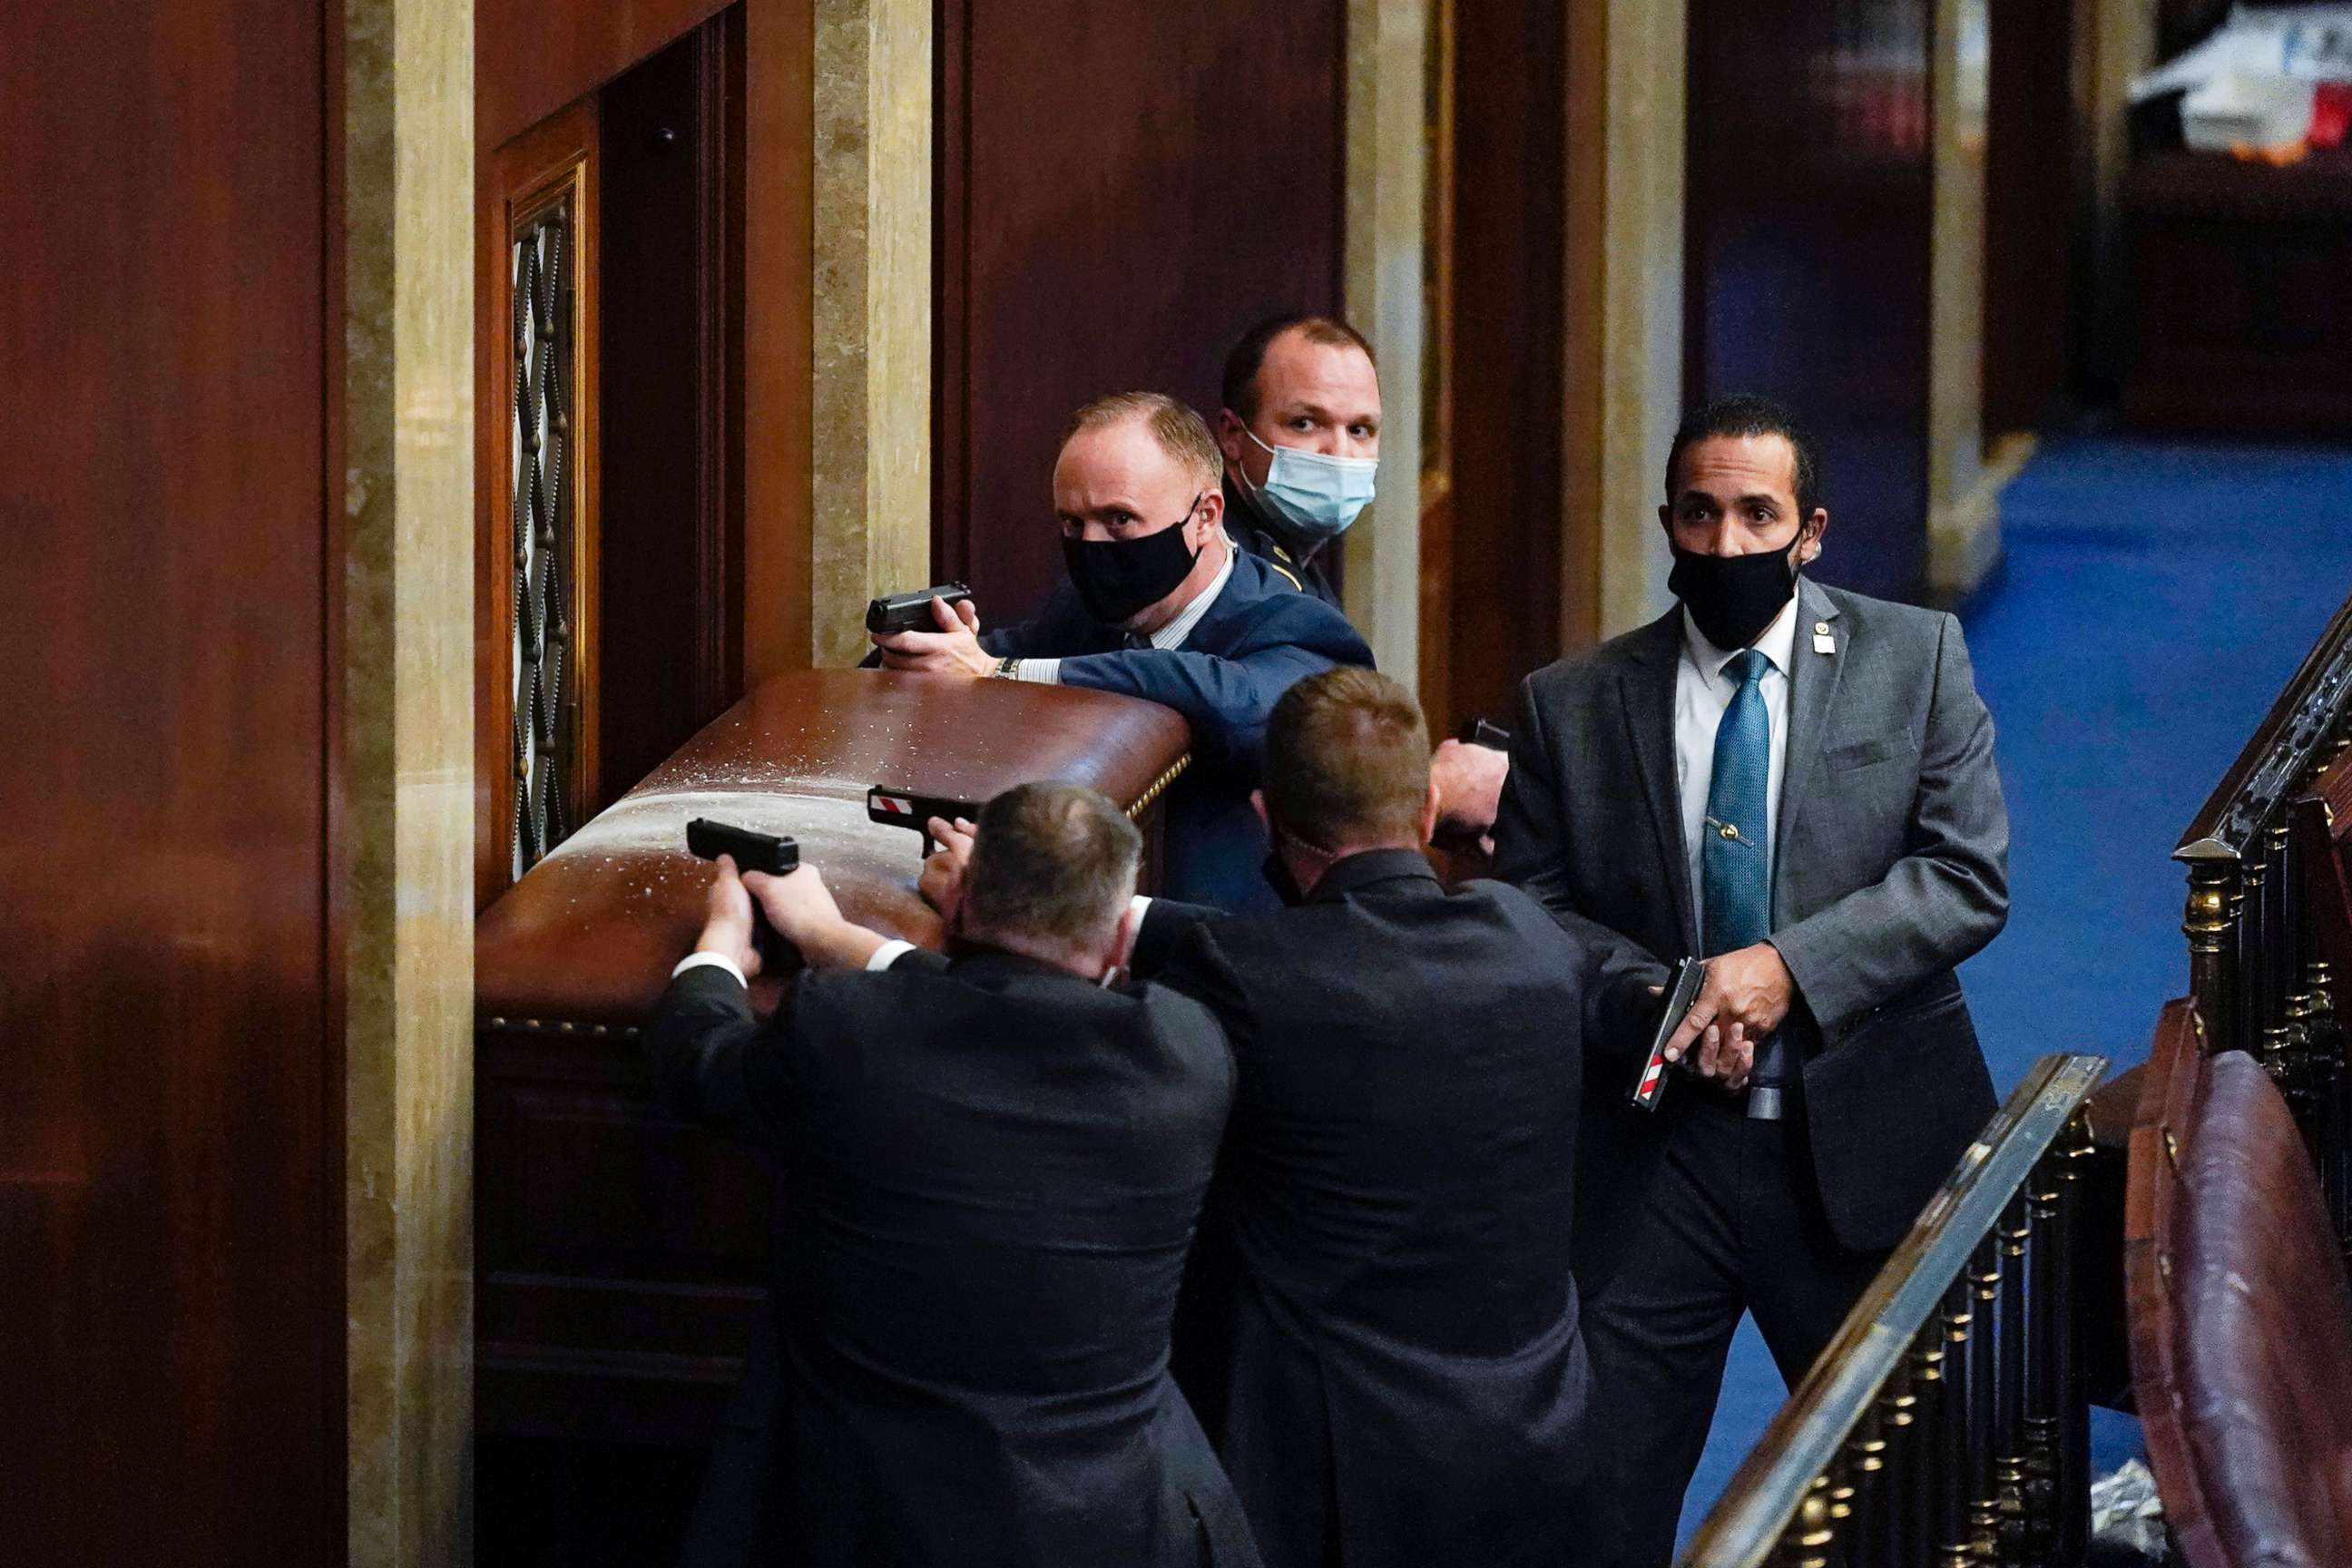 PHOTO: U.S. Capitol Police with guns drawn stand near a barricaded door as protesters try to break into the House Chamber at the U.S. Capitol, Jan. 6, 2021, in Washington, D.C.